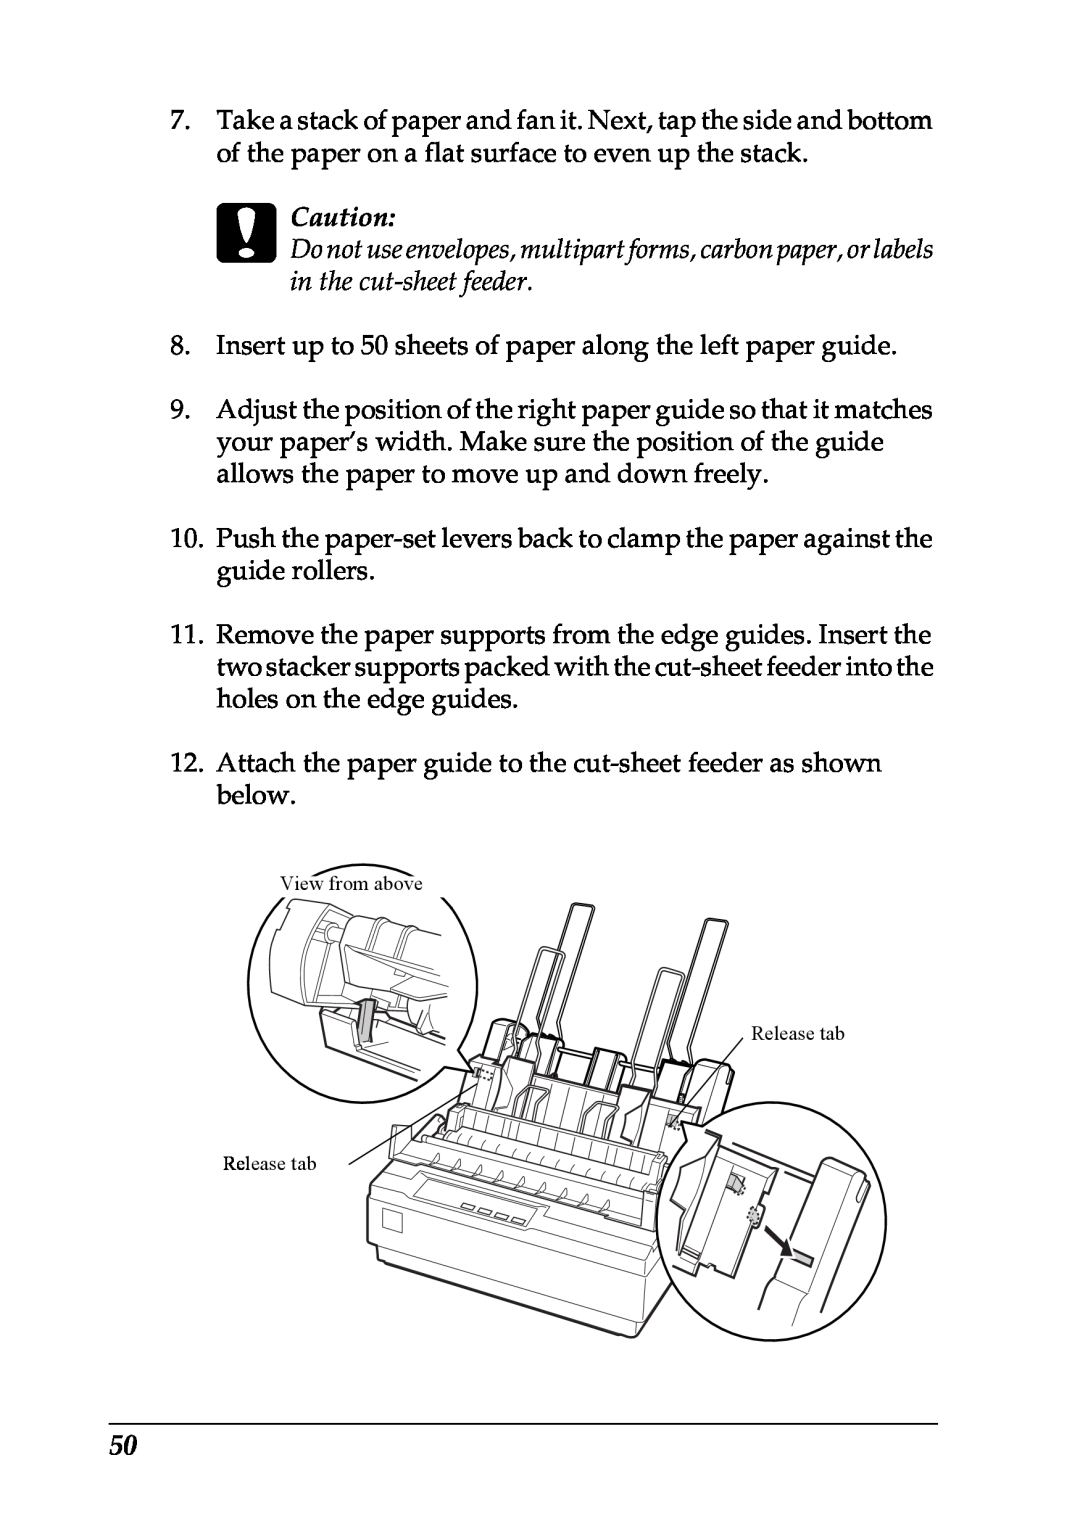 Epson LX-1170 manual c Caution, Insert up to 50 sheets of paper along the left paper guide 